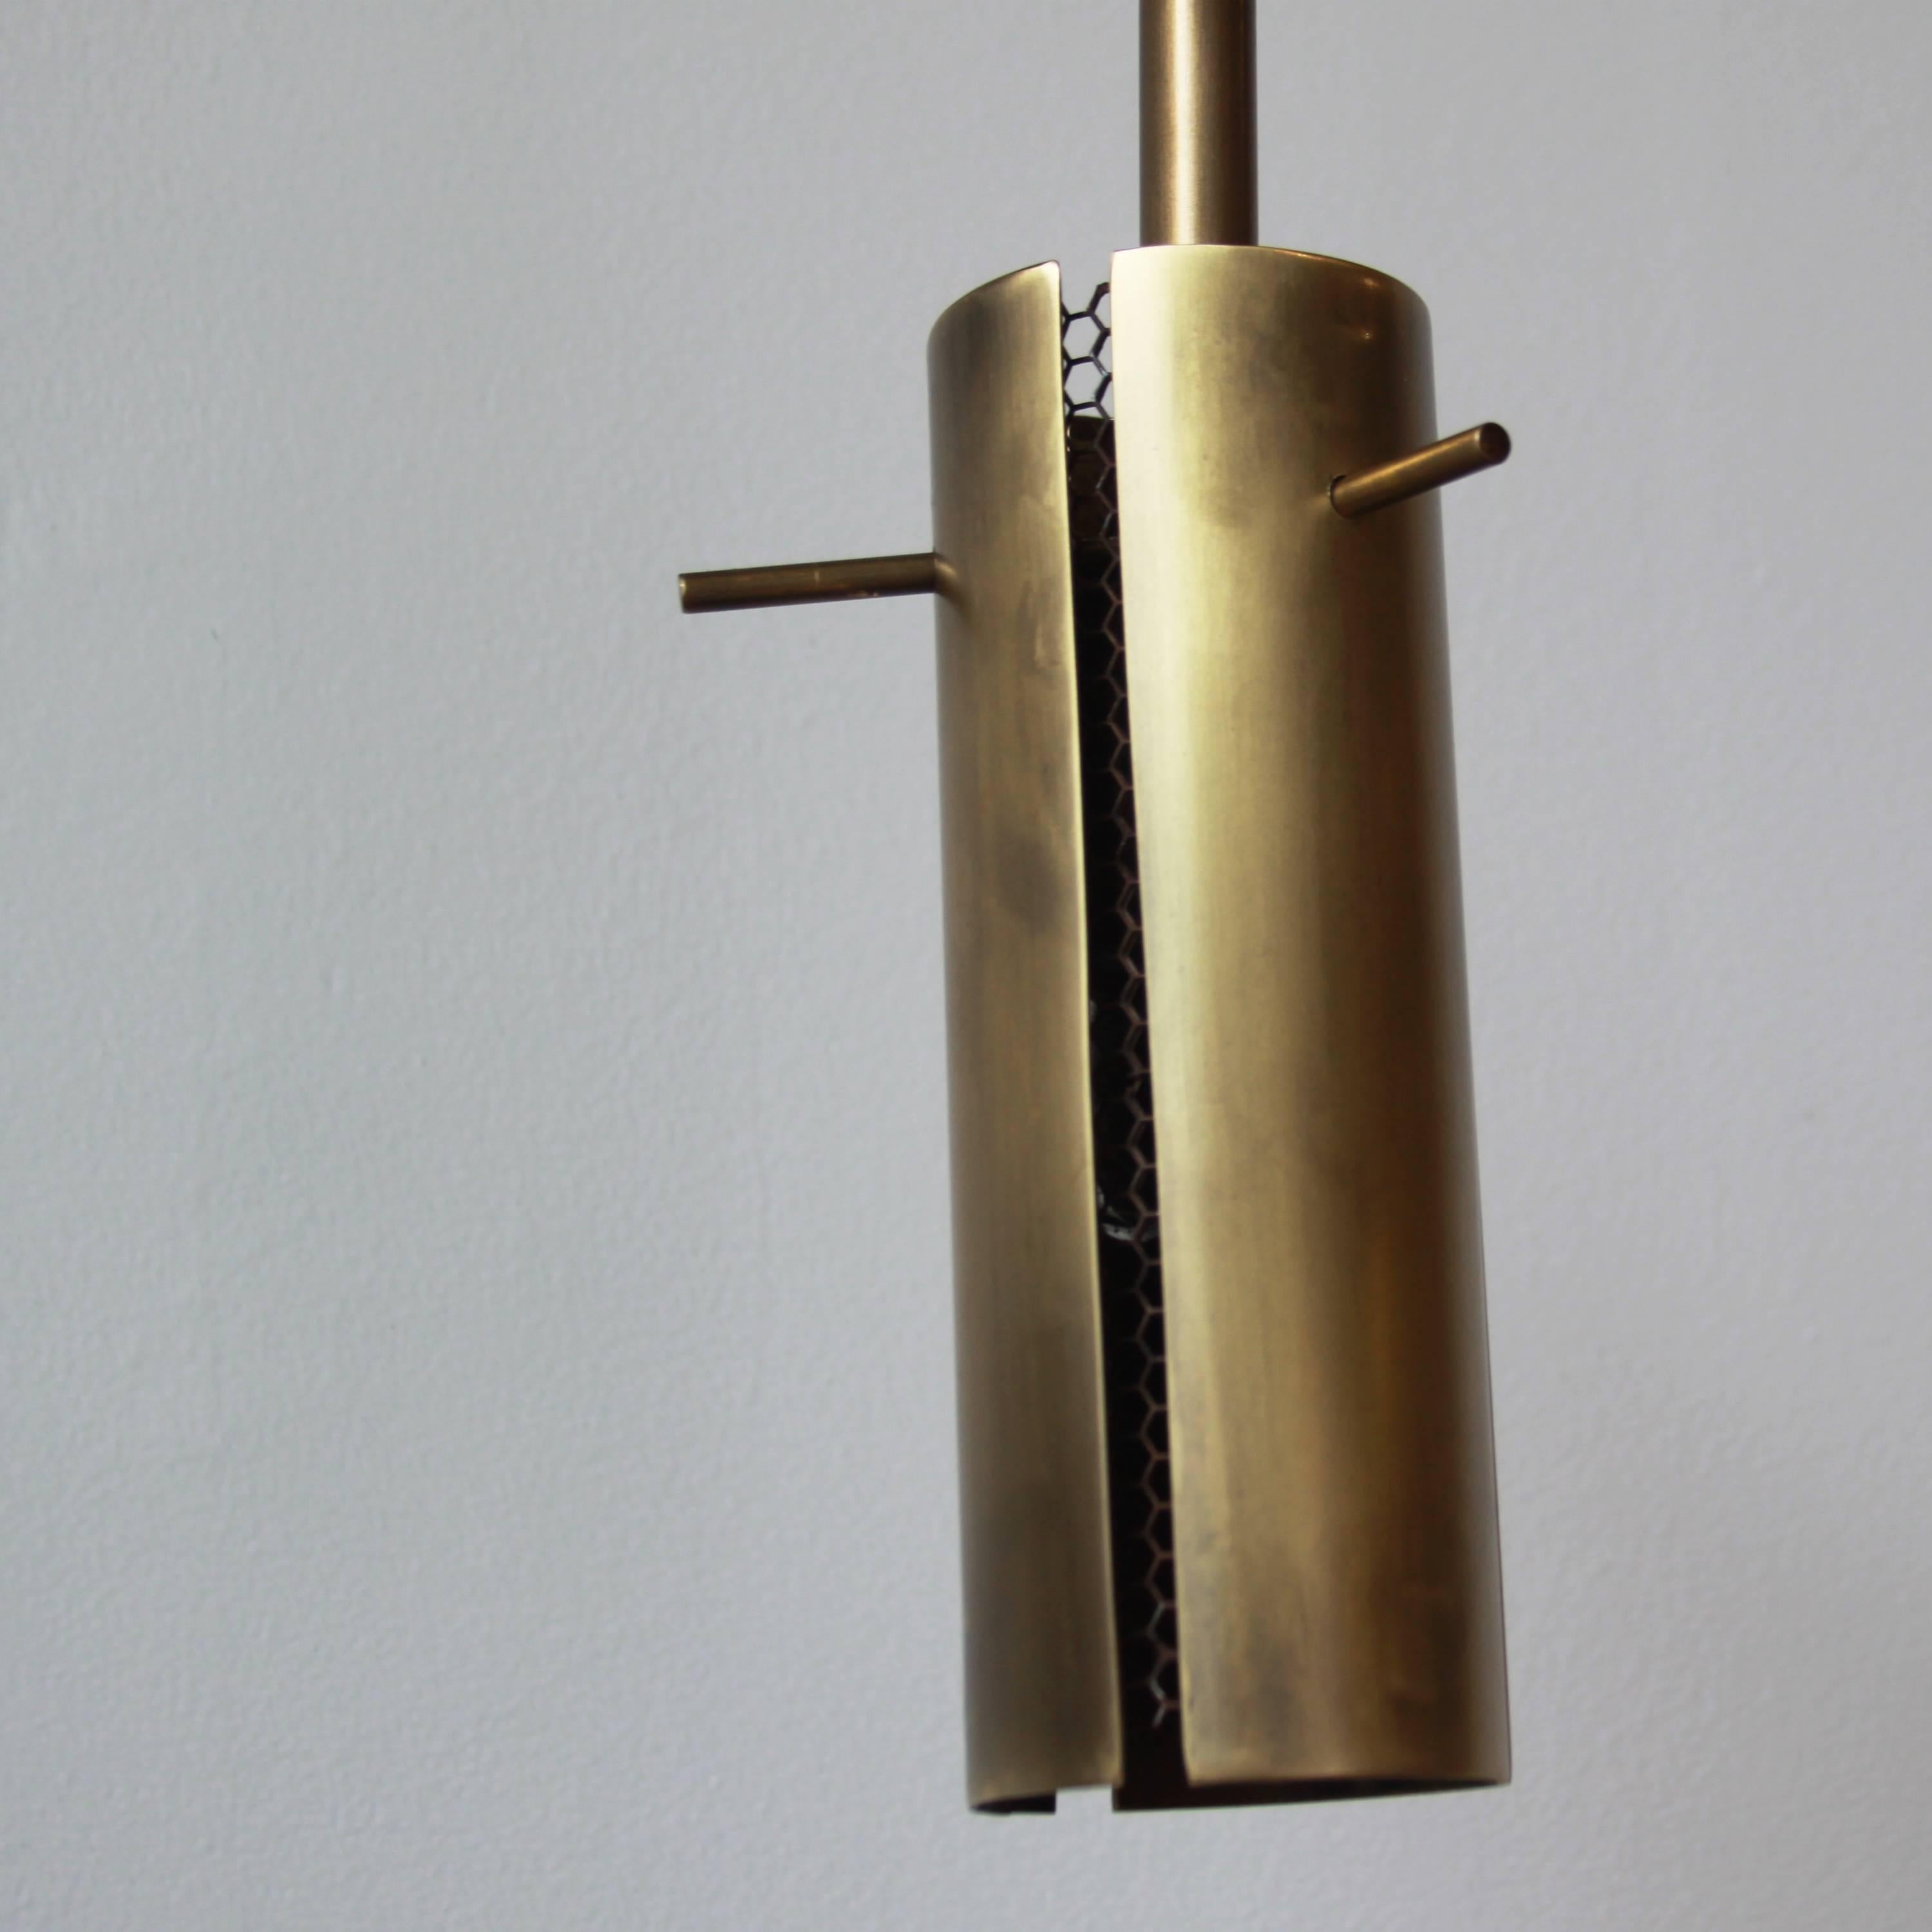 This elegant brass pendant light by Thomas Hayes studio provides DIM directional lighting. This linear fixture's slow rotation provides a warm glow and is available in steel as well as a variety of brass finishes.